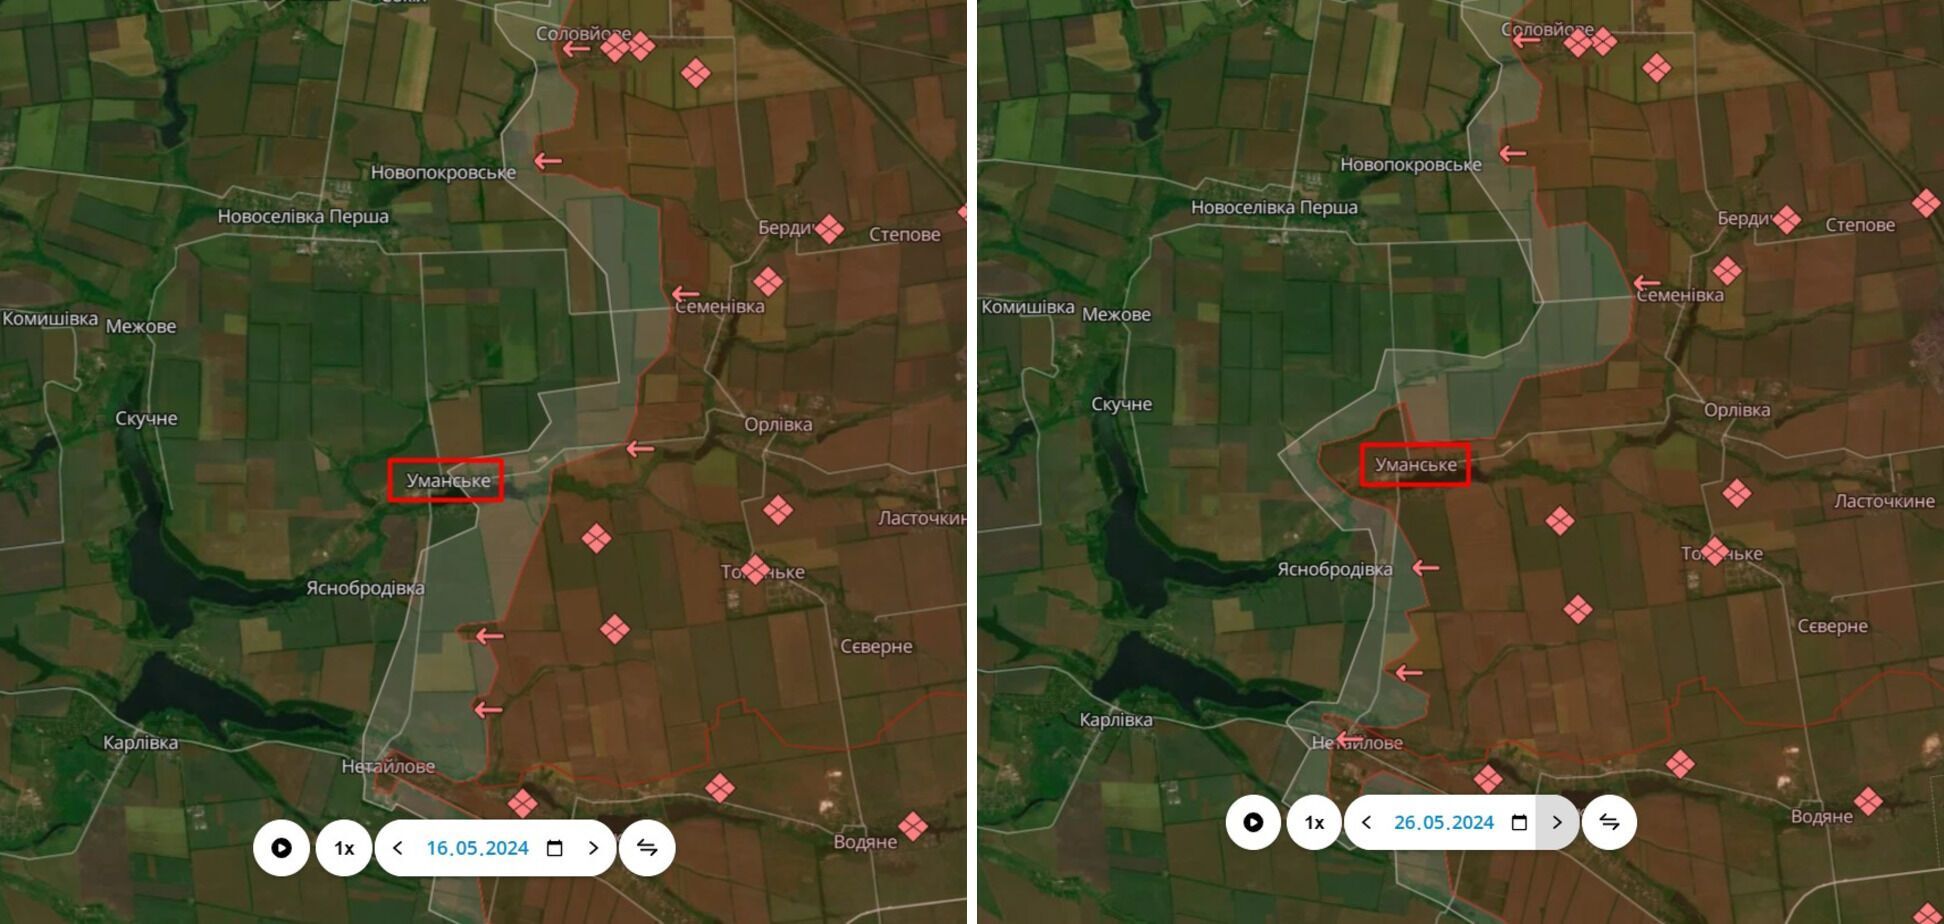 Russian troops capture Umanske and advance in Ivanivka - DeepState